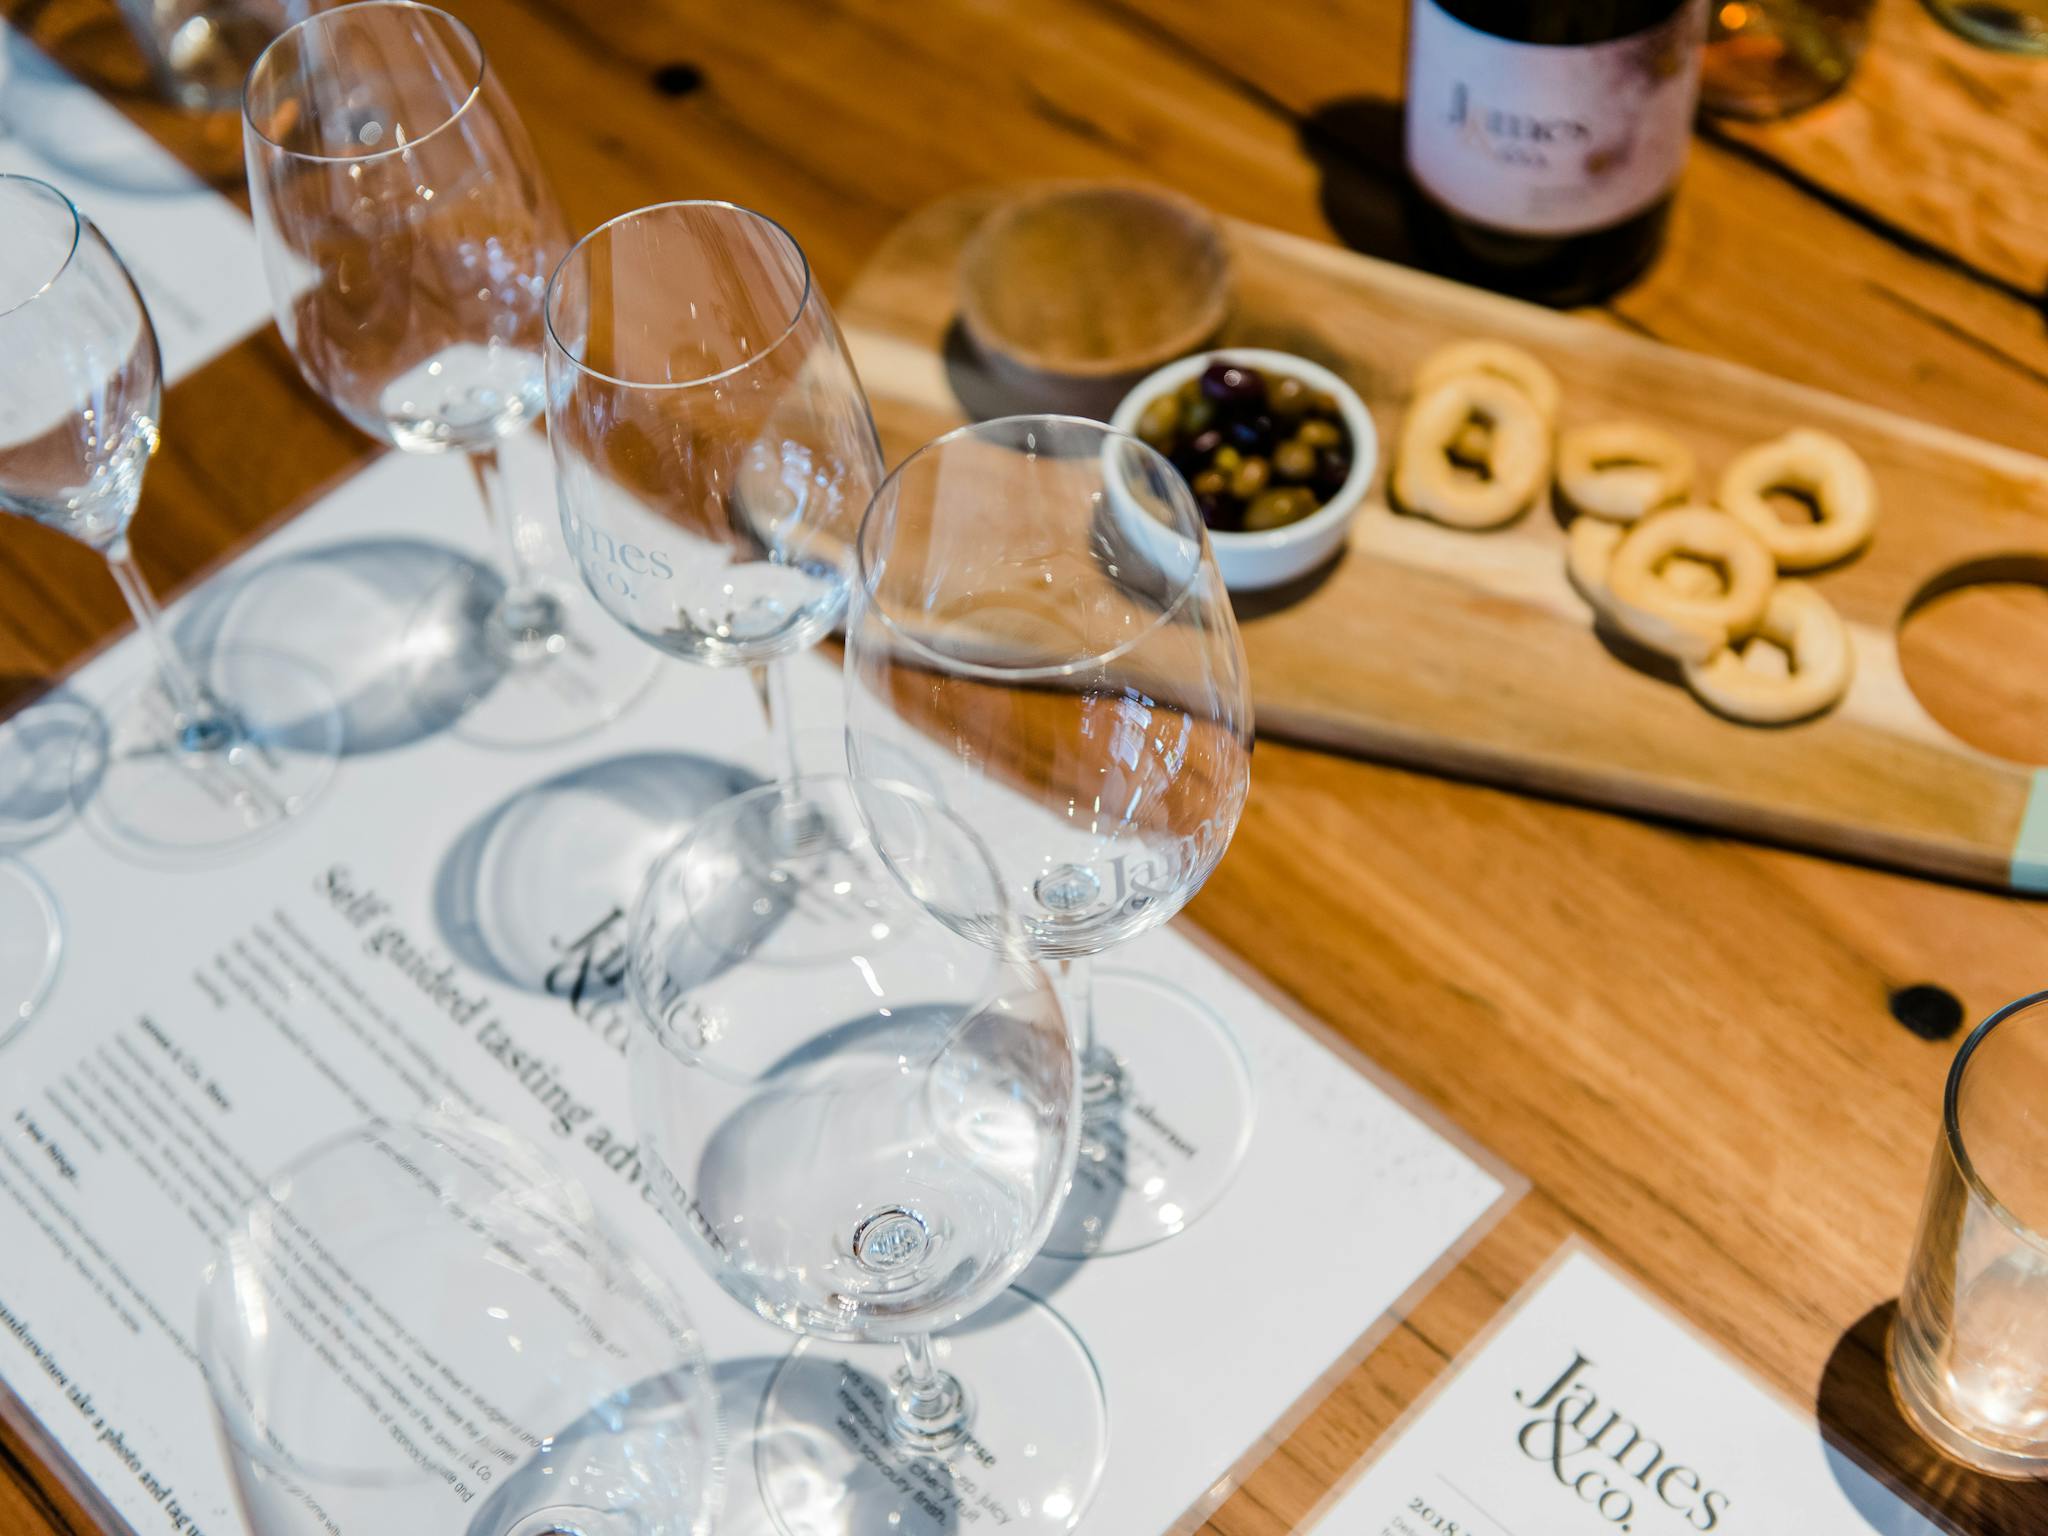 Elevate your visit to Rutherglen - book your wine tasting adventure at James & Co. Wines today